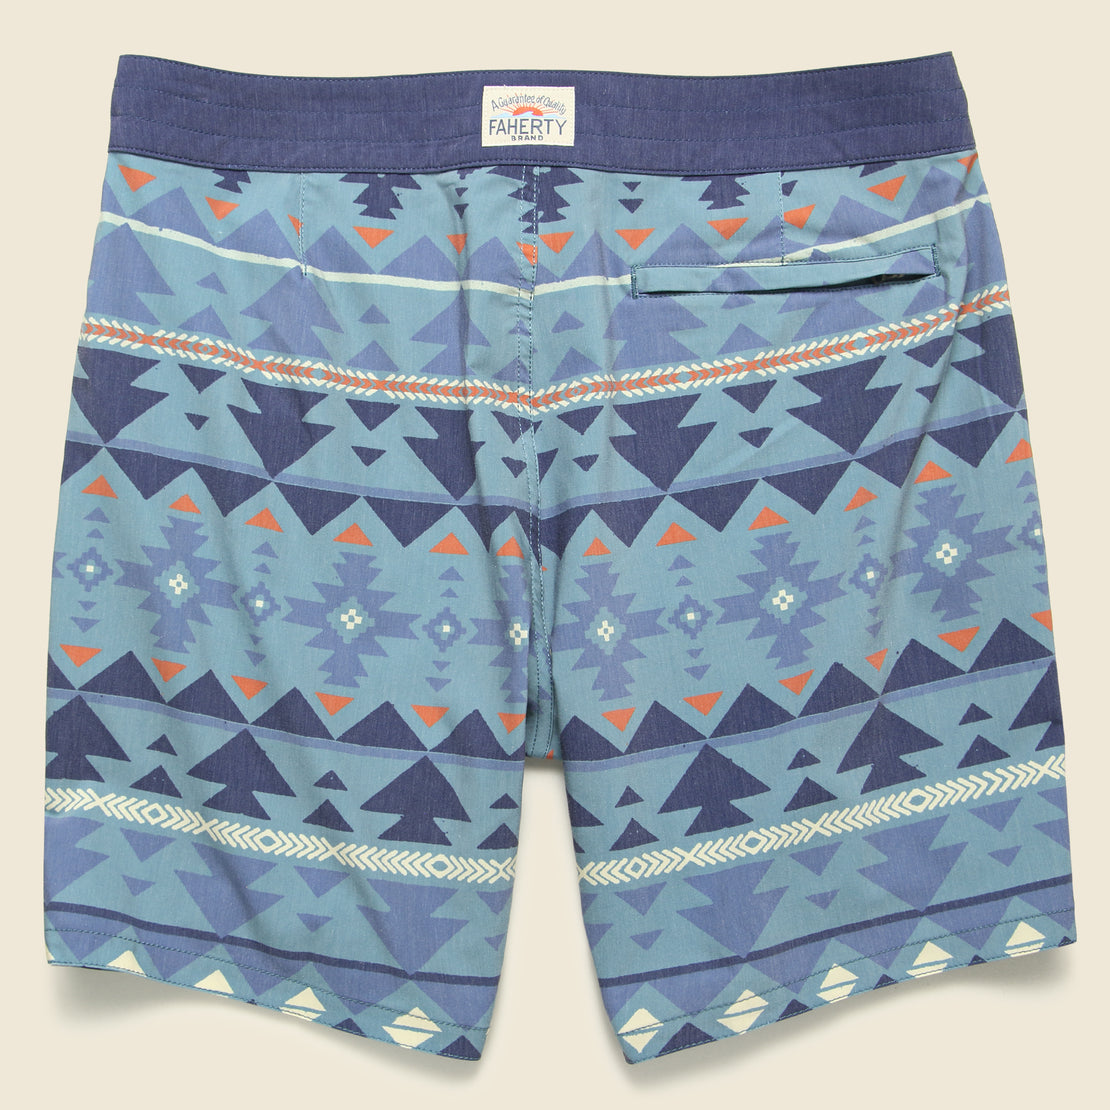 Good Feather 7-inch Boardshort - Six Rivers Turquoise - Faherty - STAG Provisions - Shorts - Swim